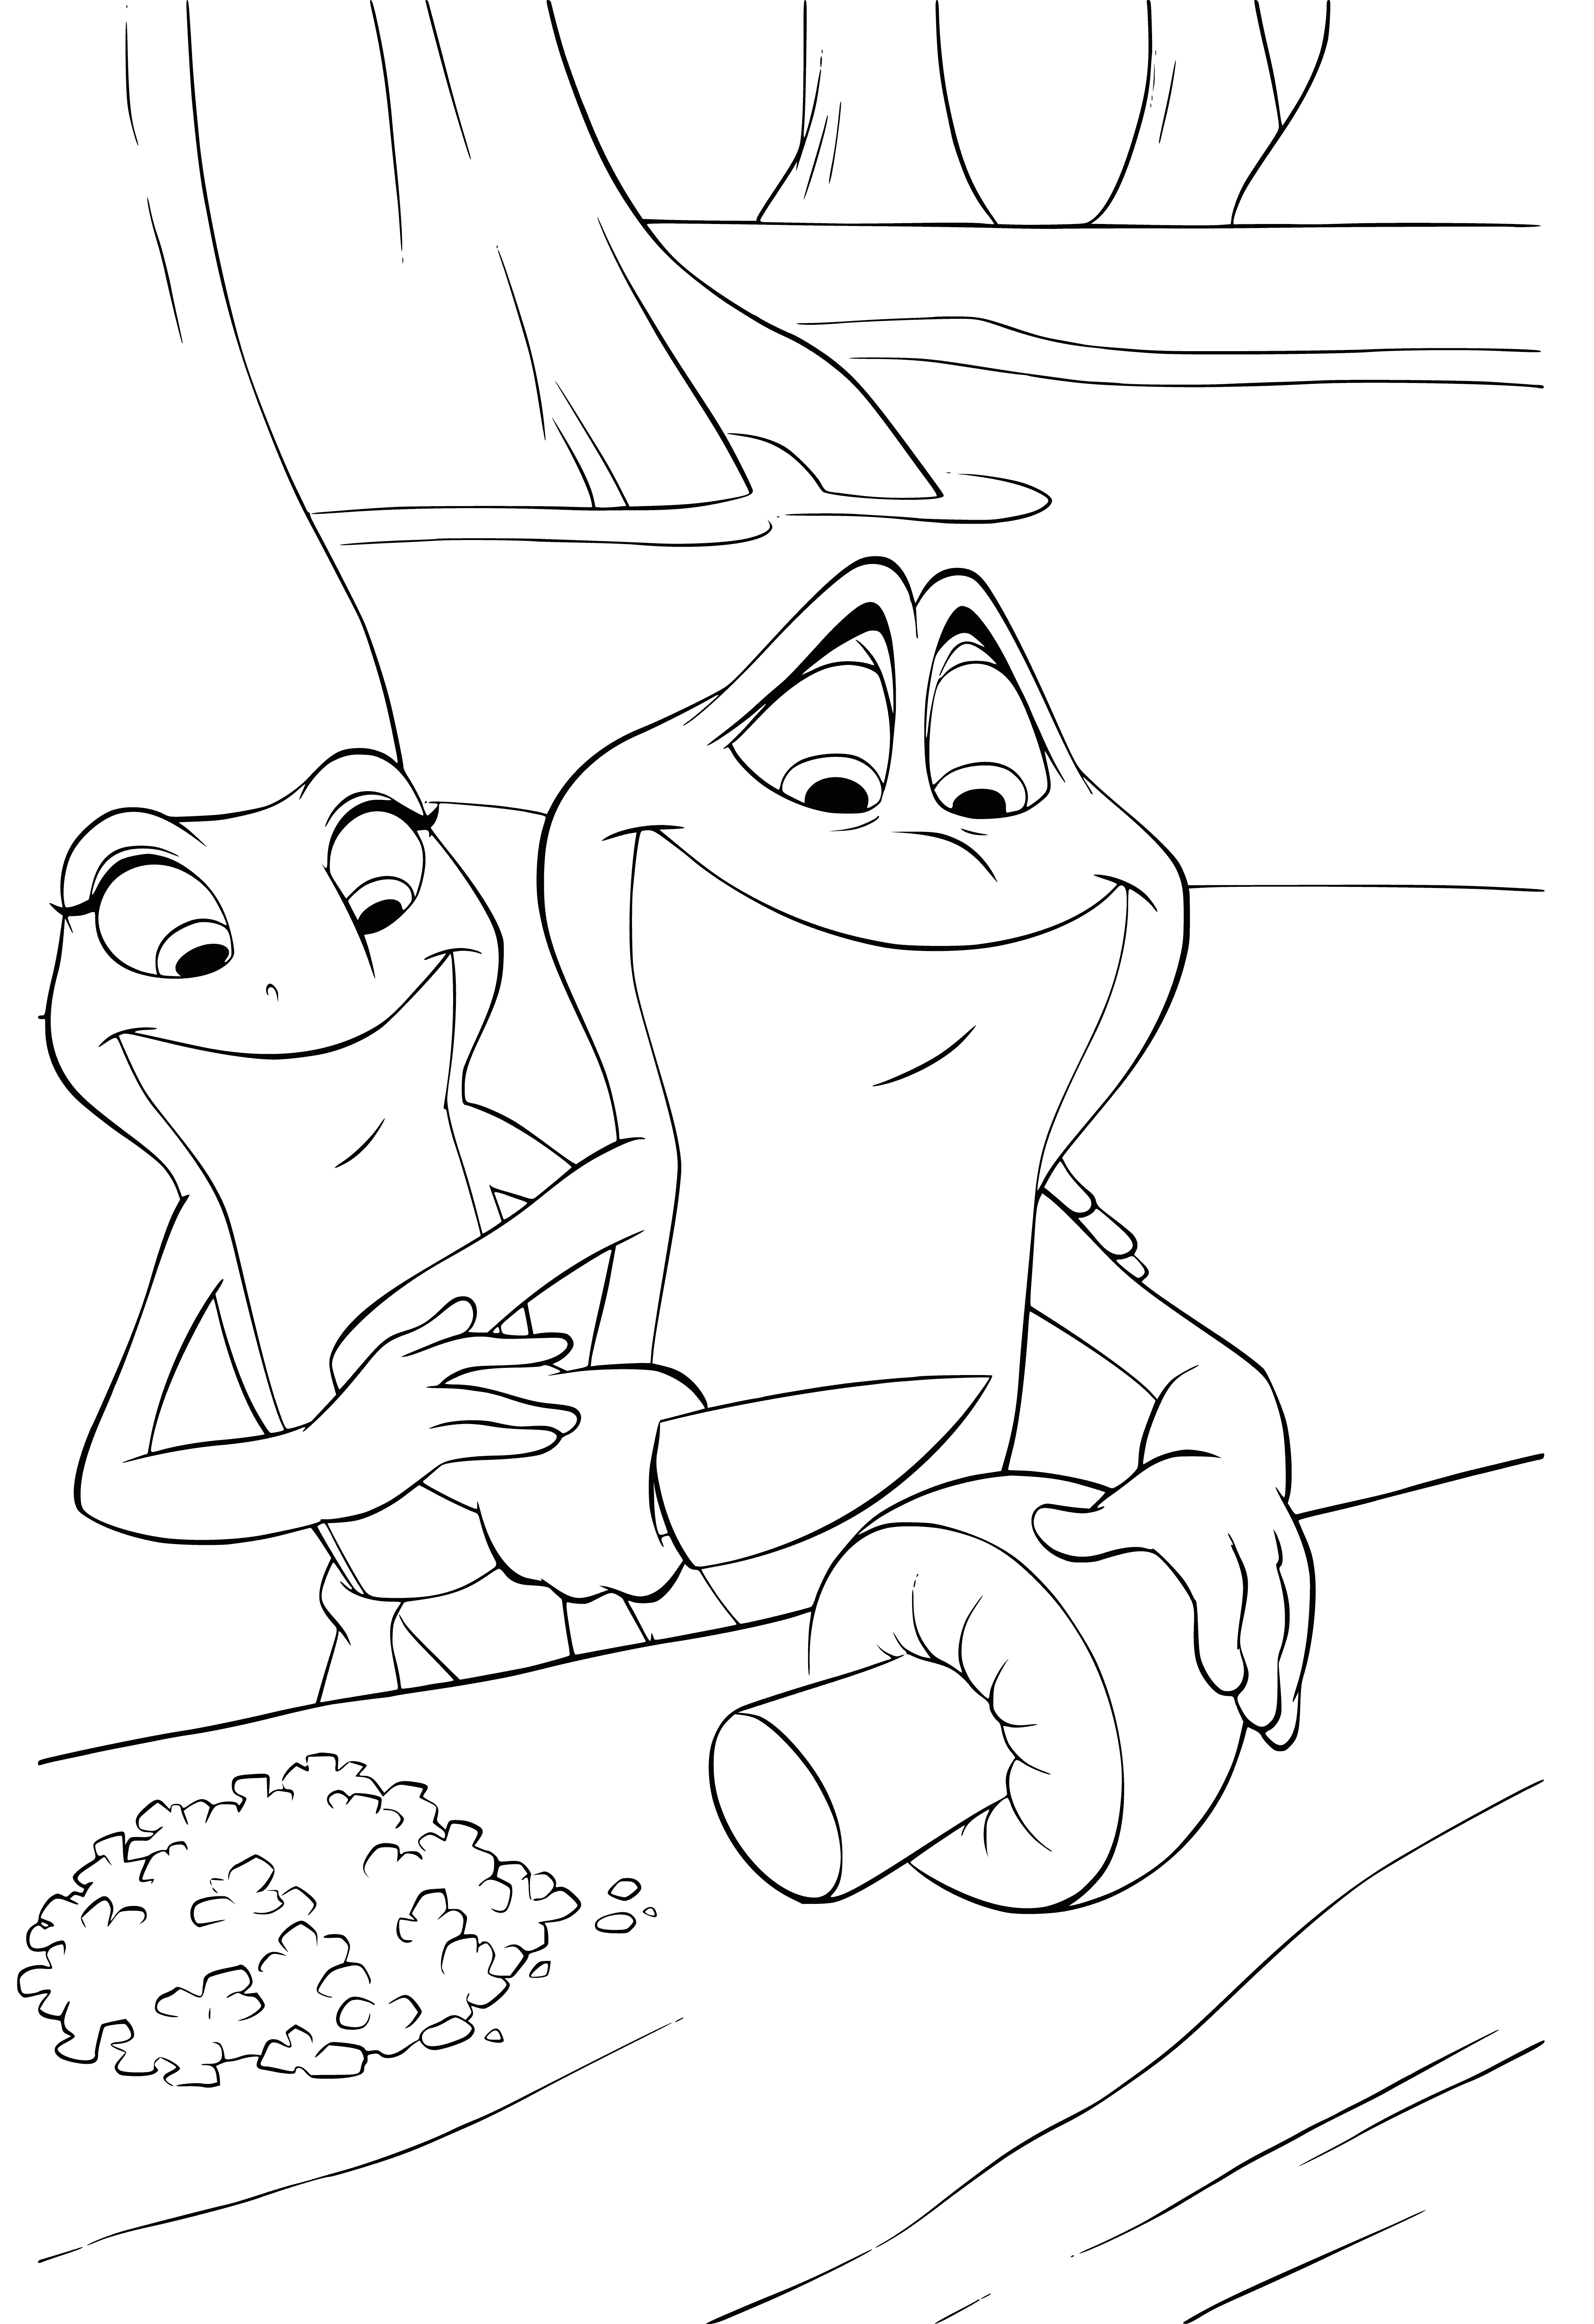 coloring page: Boy smiles while cooking & making a mess - ingredients & dishes surround him.